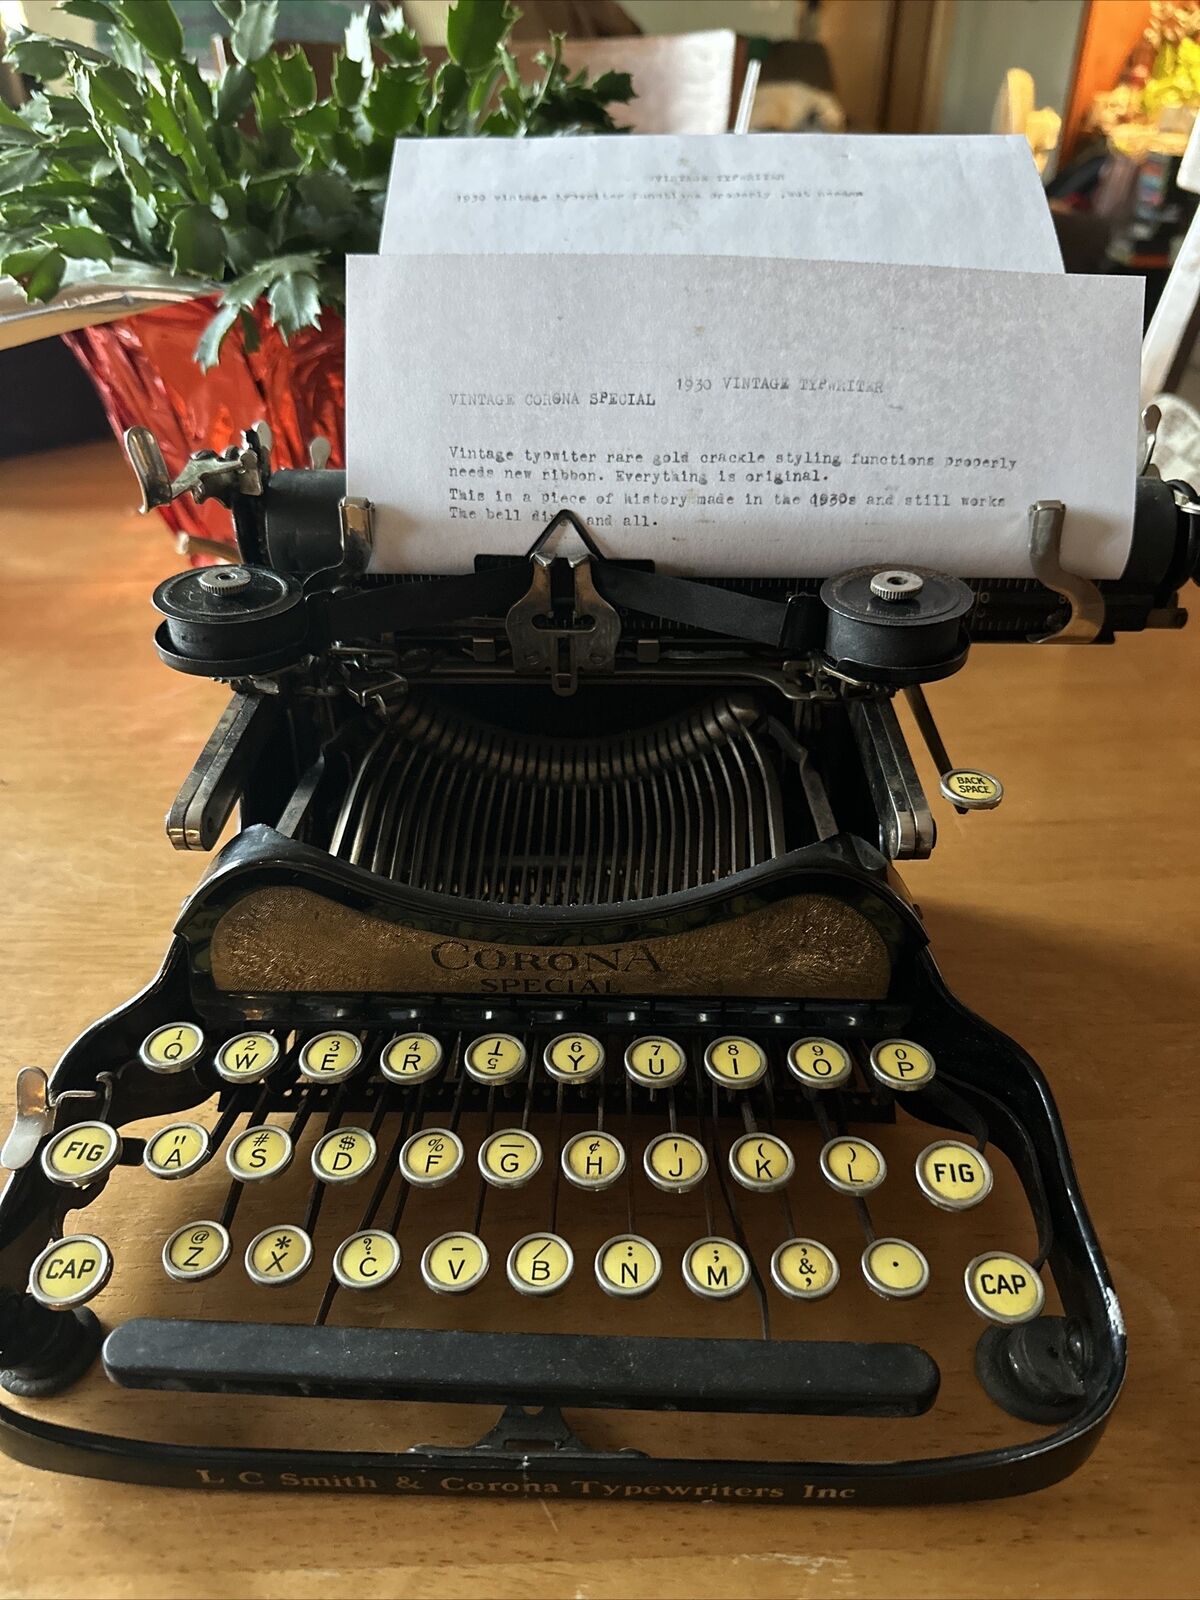 1930’s Vintage Corona Special Typewriter With Gold Crackle Accents